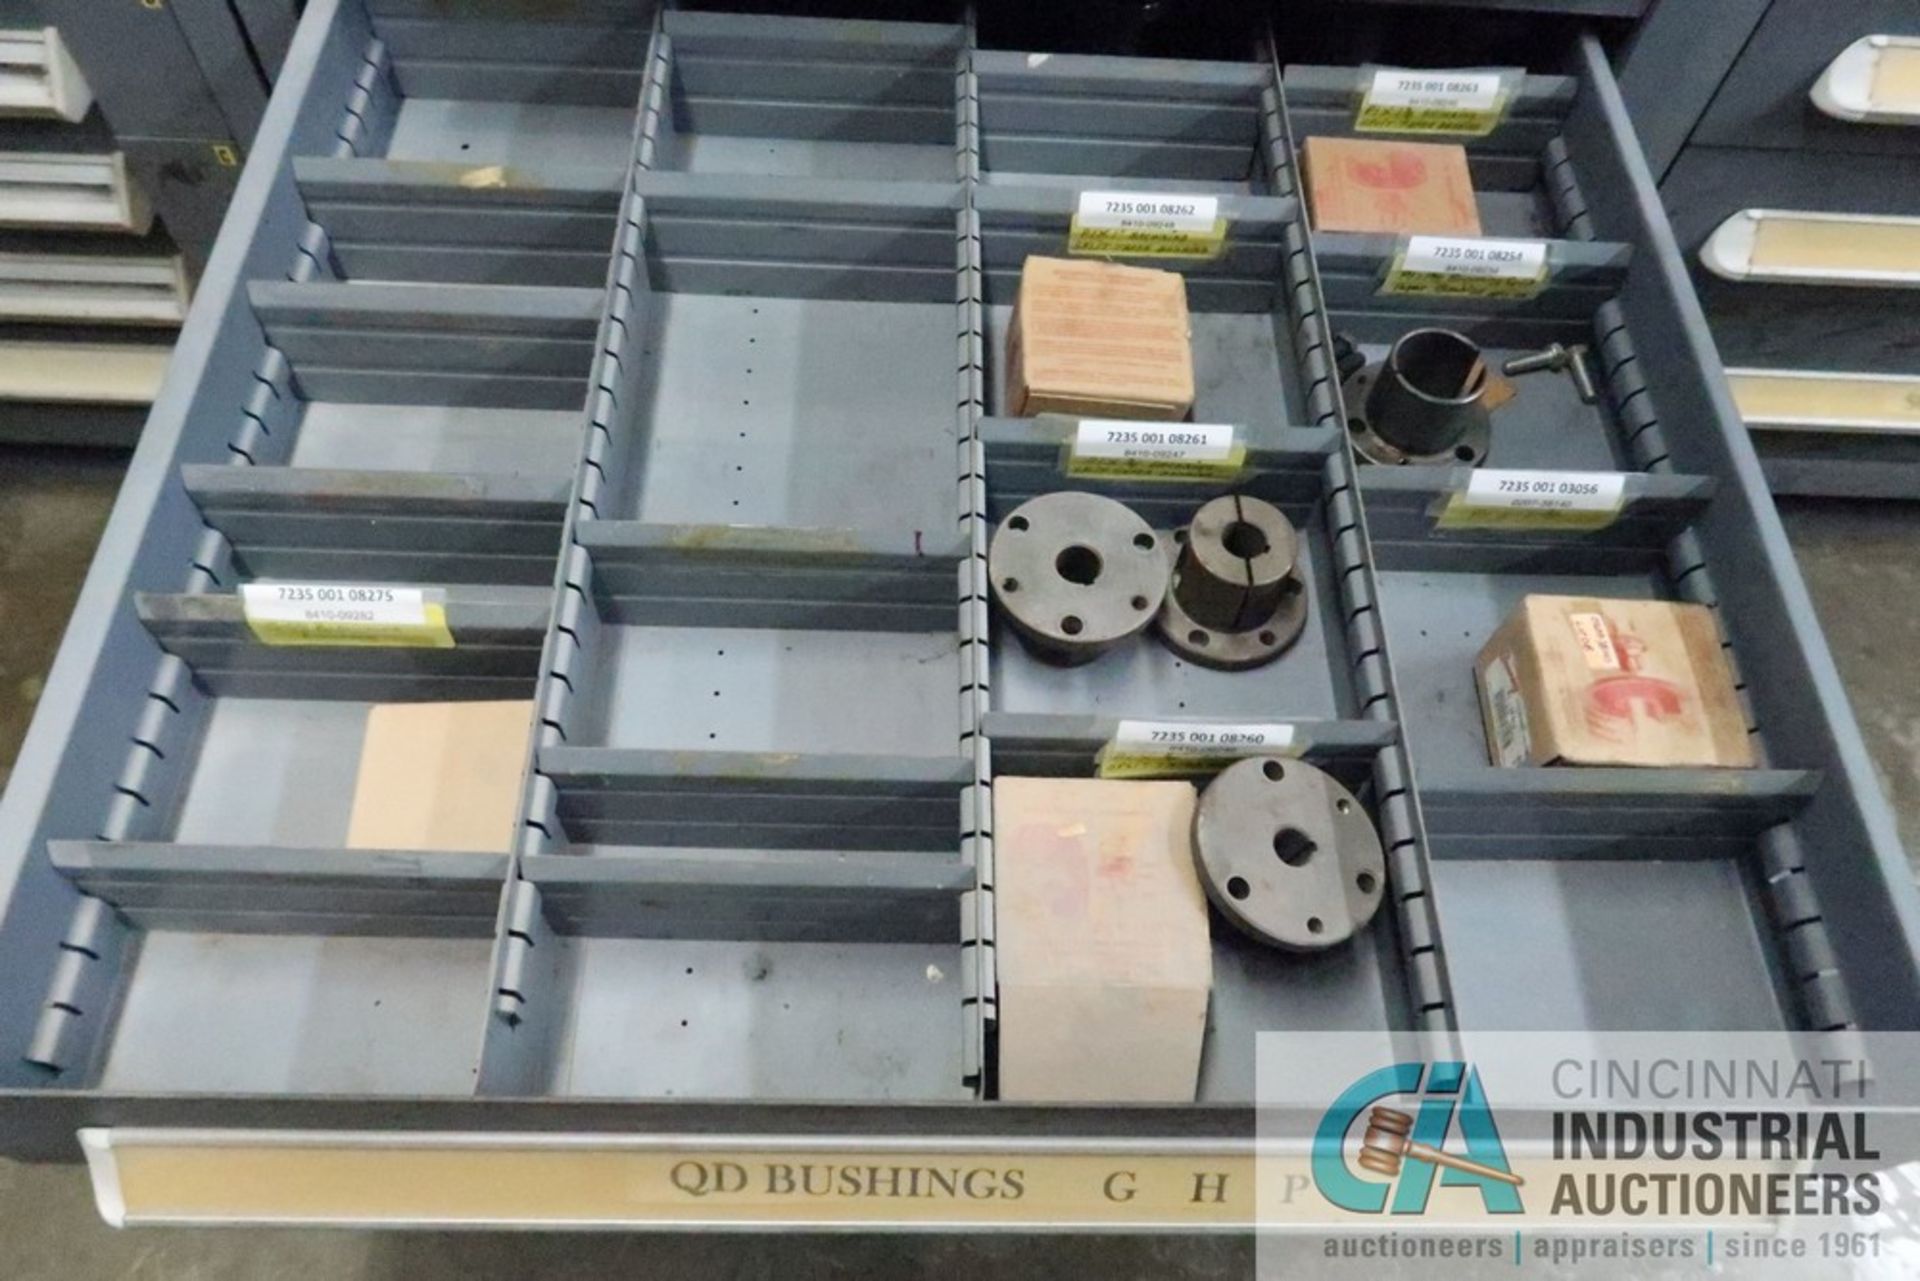 15-DRAWER LISTA CABINET WITH CONTENTS INCLUDING MISCELLANEOUS BUSHING AND FLANGES (CABINET LI) - Image 12 of 13